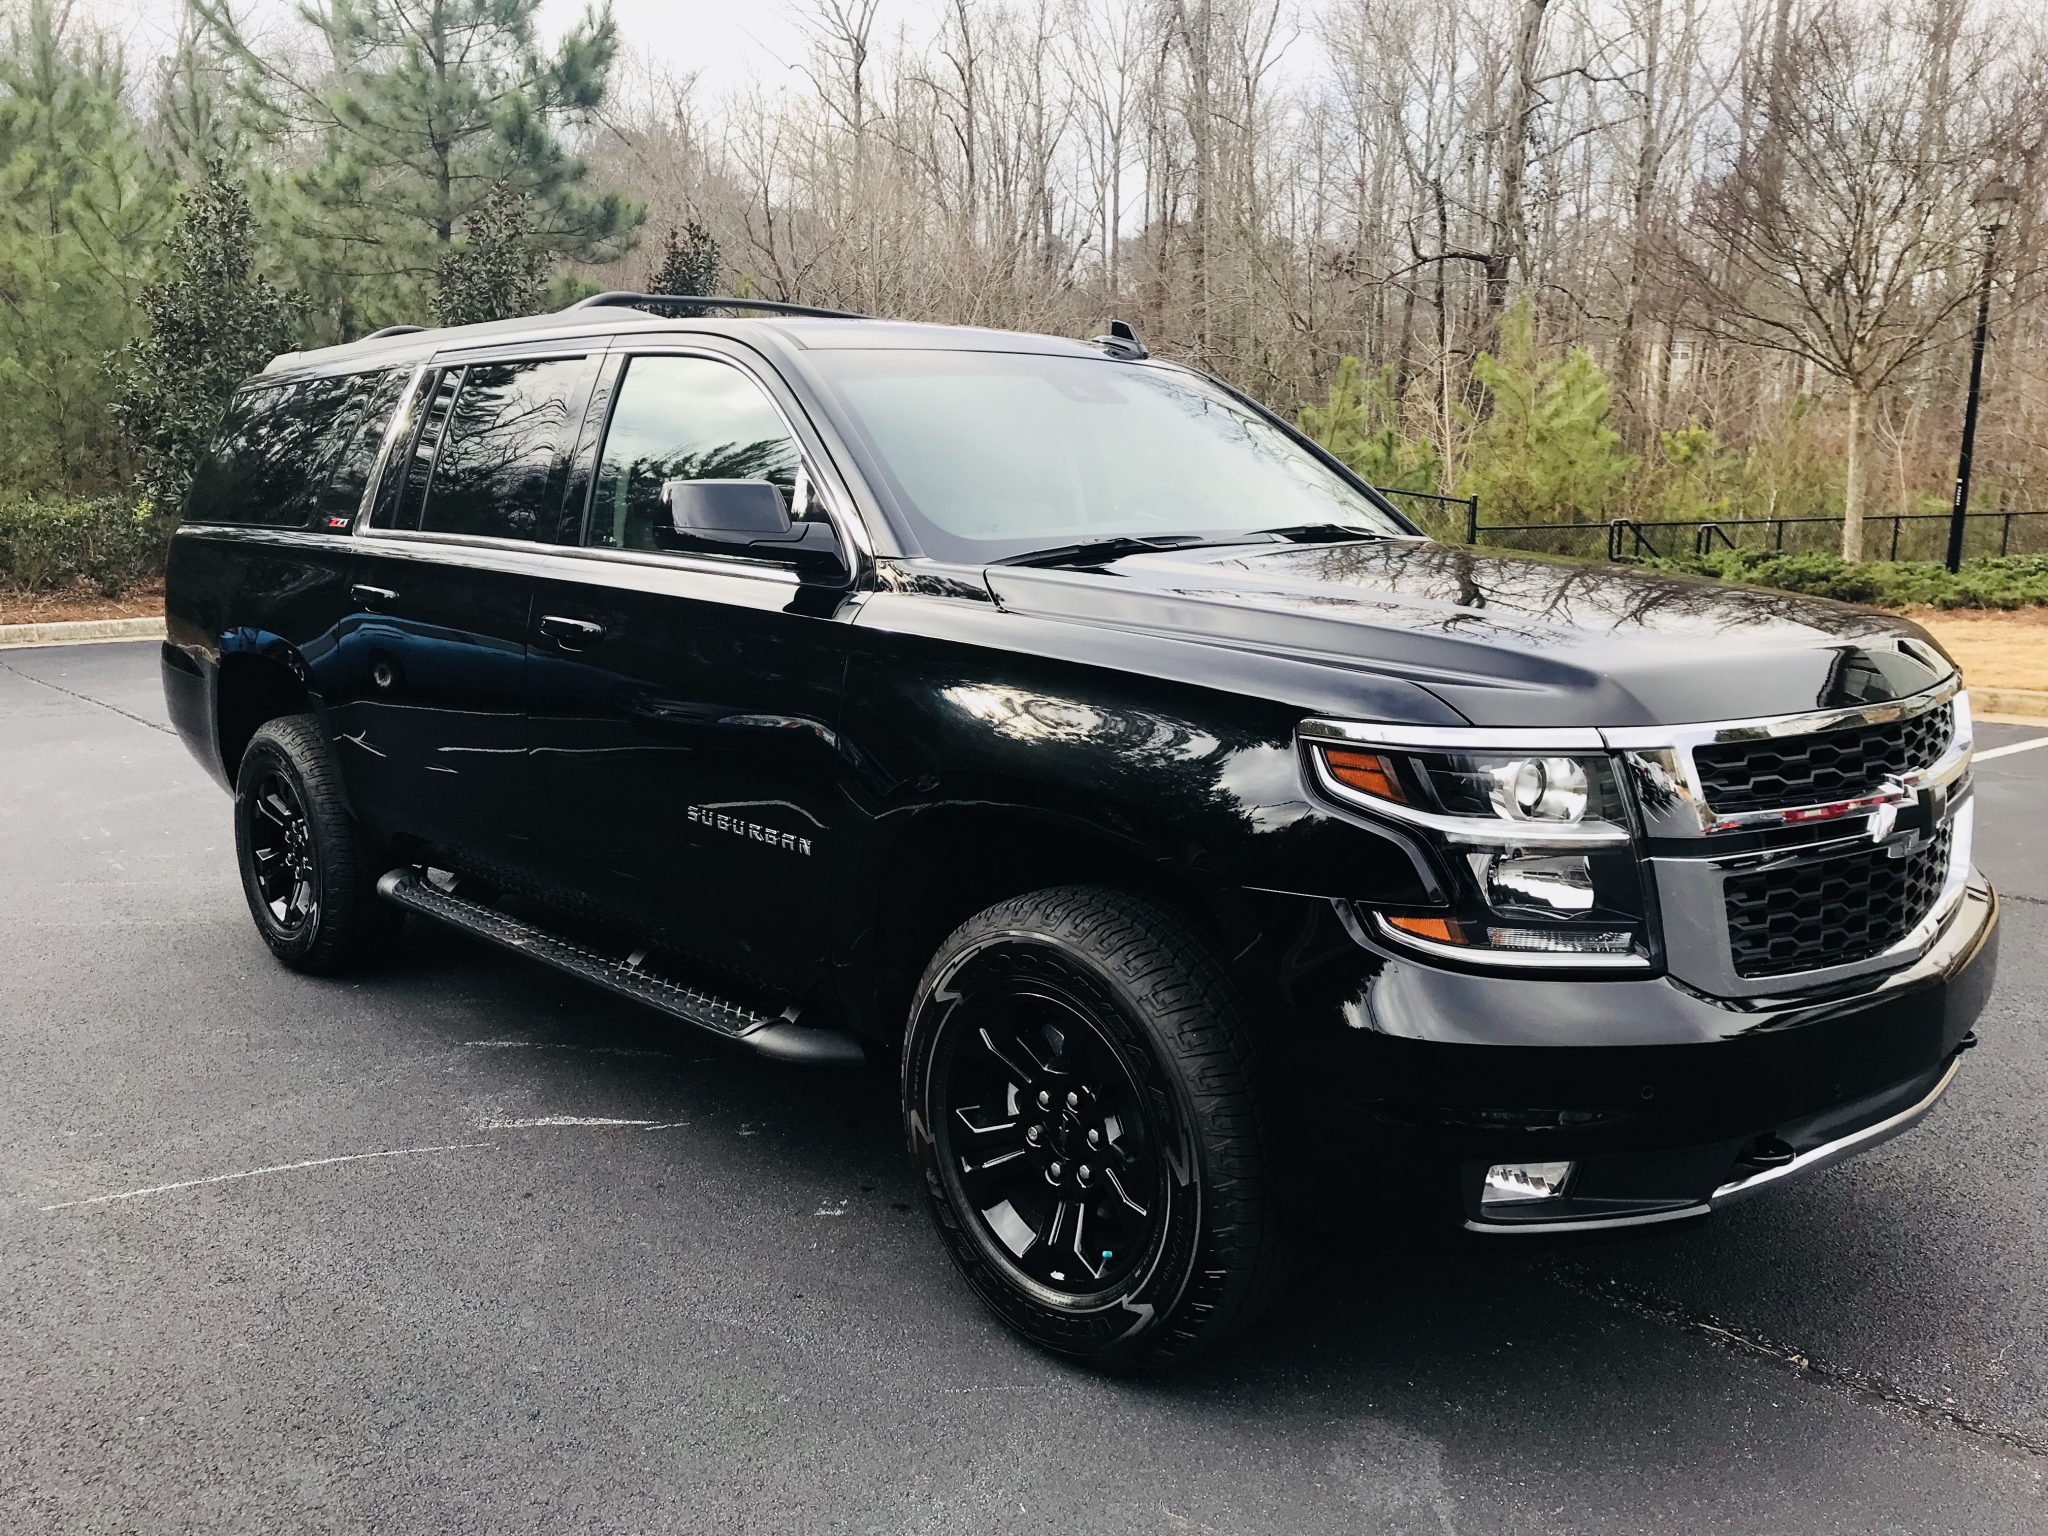 Five Fun Things I Did With The 2018 Chevrolet Suburban Z71 Midnight Edition!